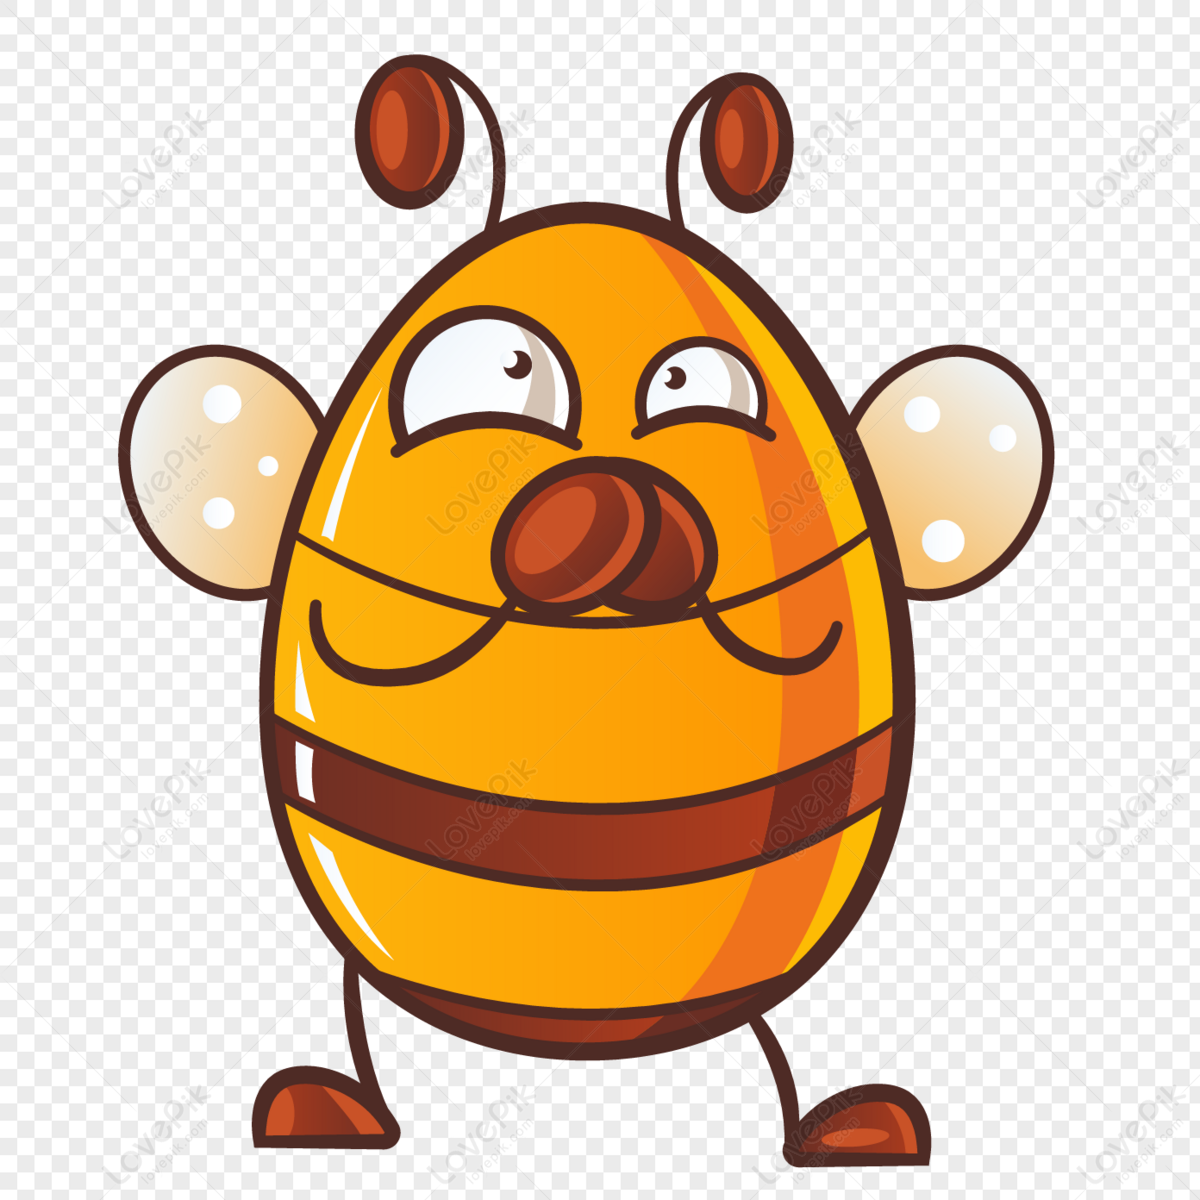 Download Barry Bee Movie Meme Anime Animal Anible - Bee Movie PNG Image  with No Background - PNGkey.com